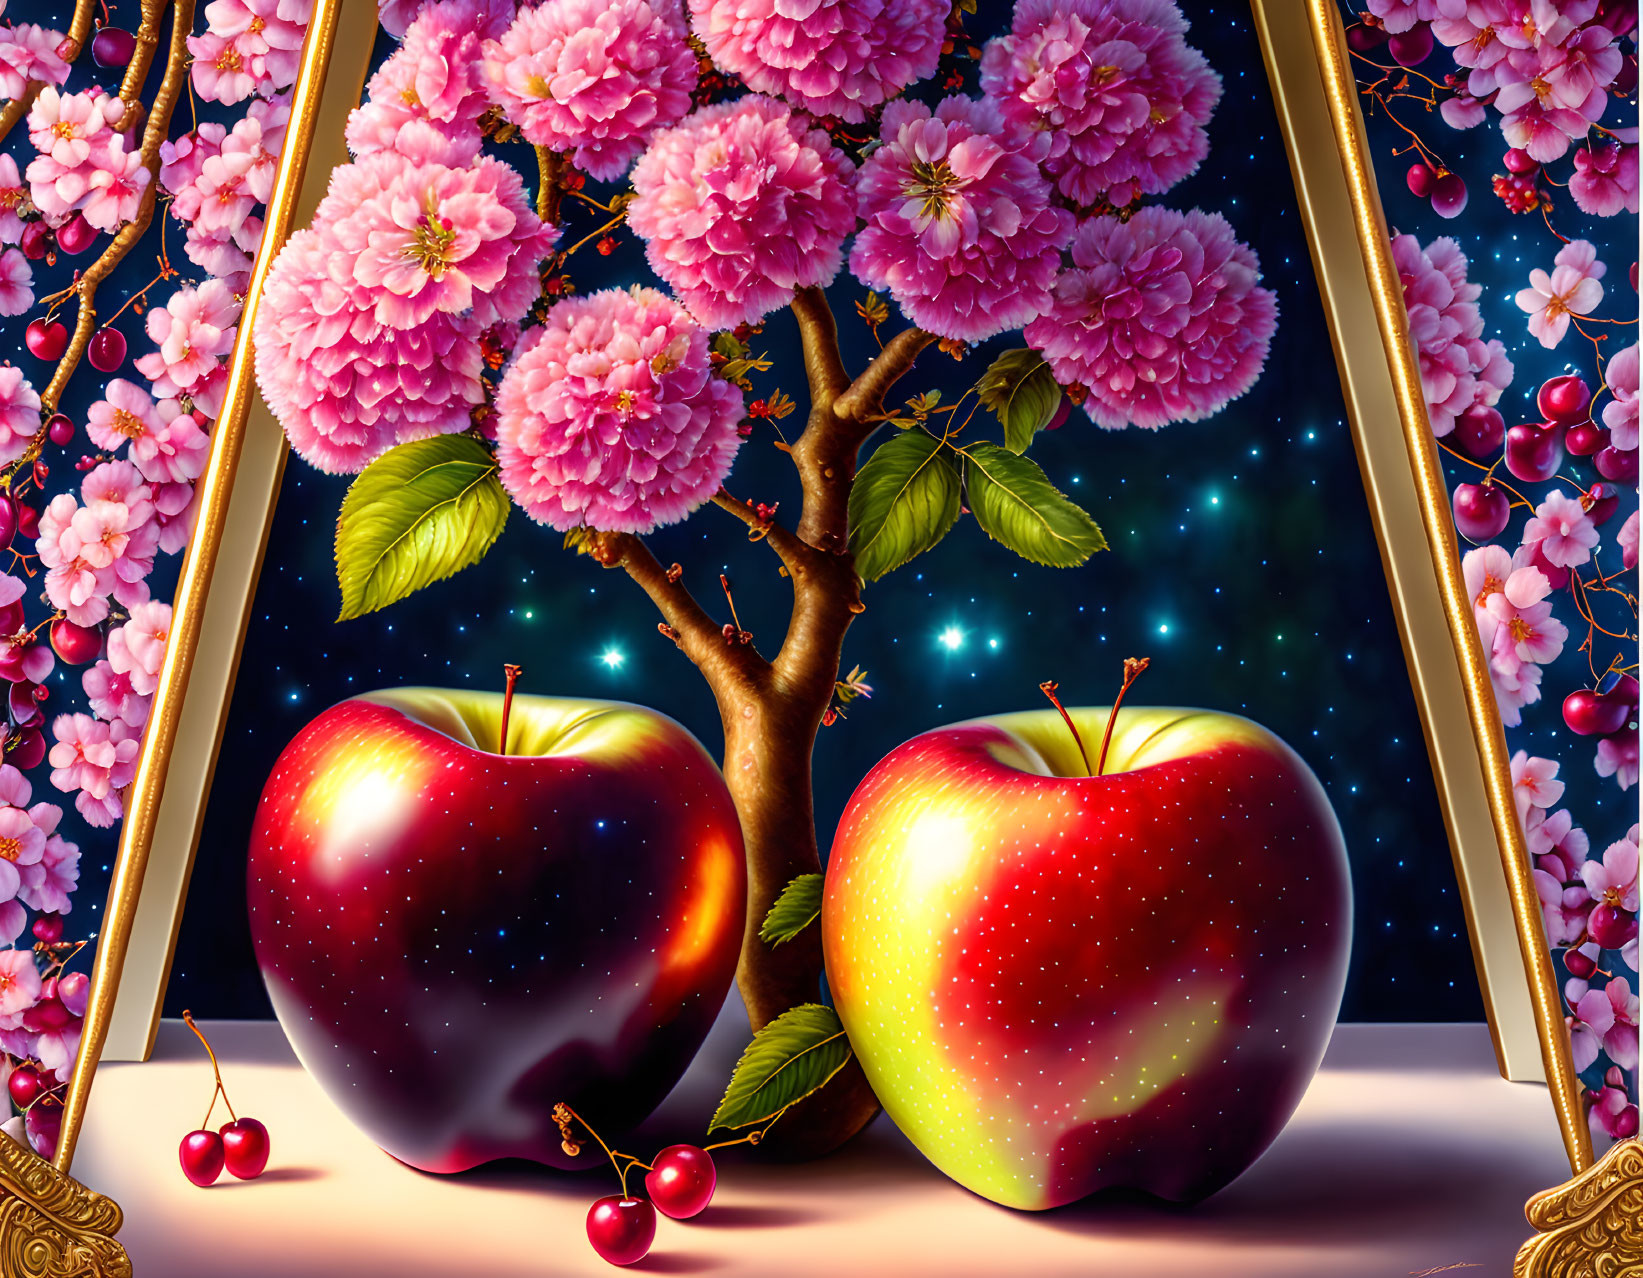 Vibrant red apples in front of magical tree with pink blossoms, starry night background.